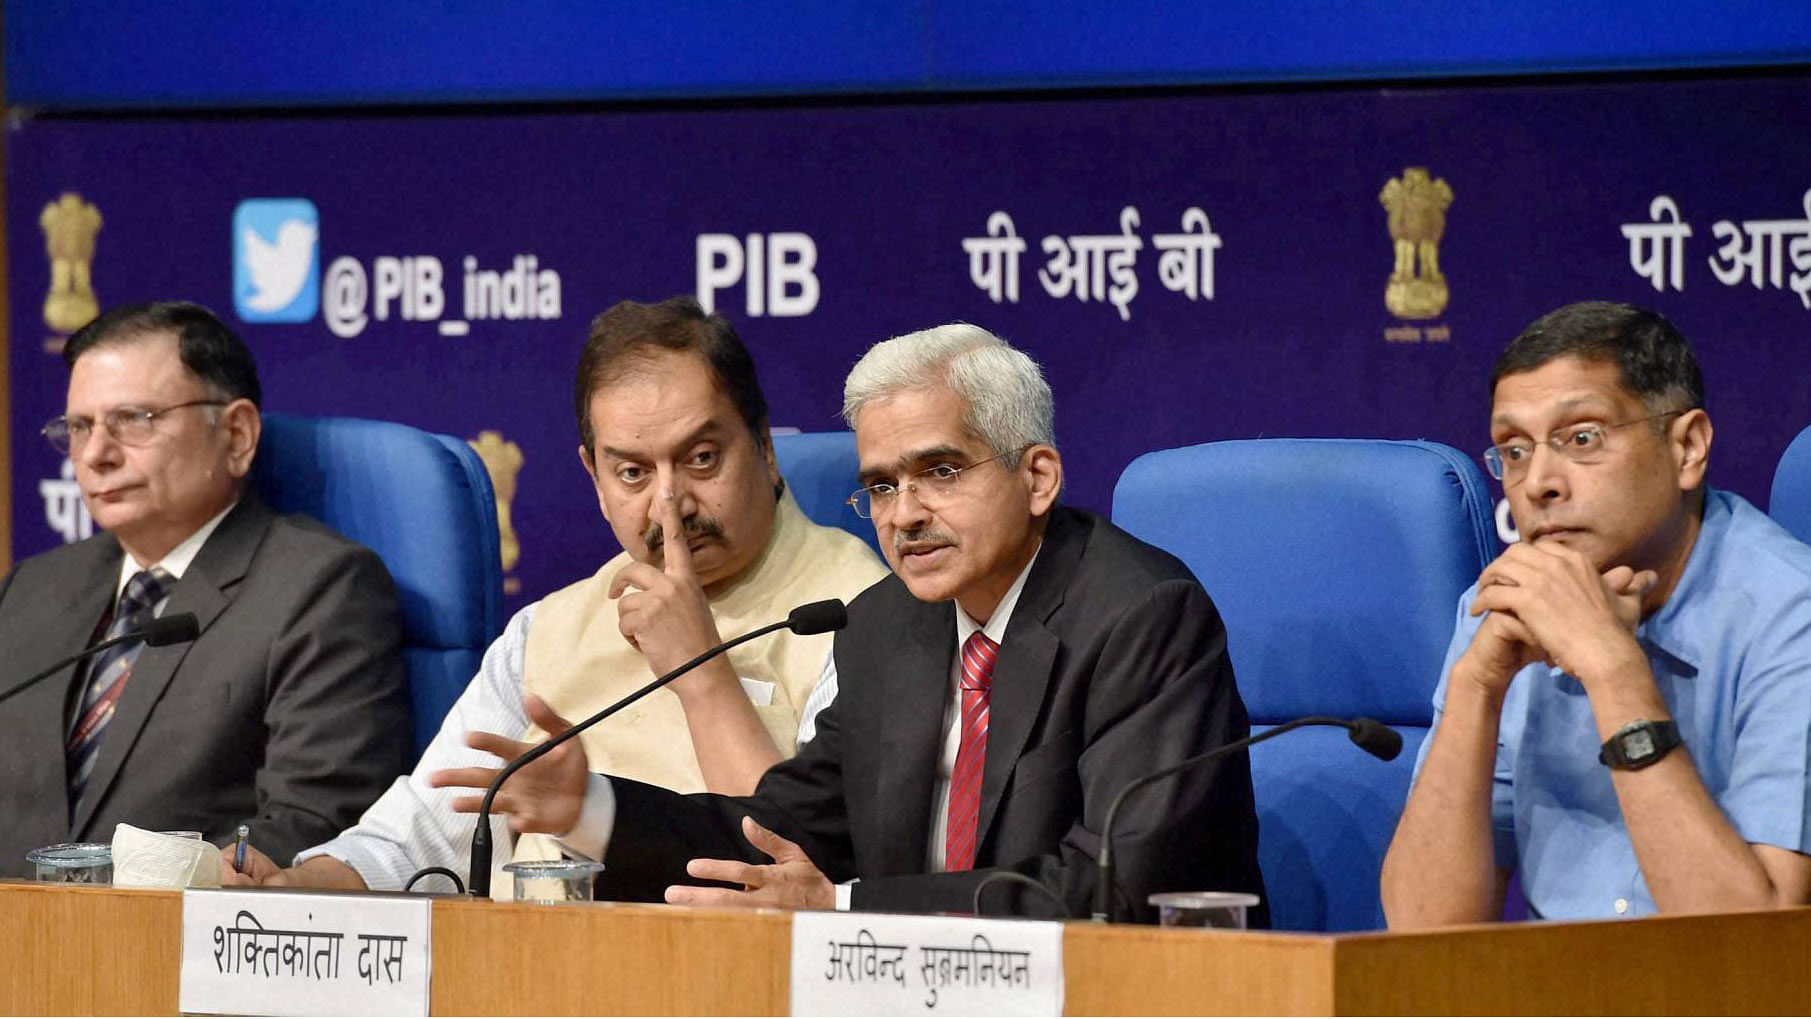 (From left to right) Finance Secretary, Ratan P Watal along with Shaktikanta Das, Secretary (DEA) and the Chief Economic Adviser (CEA) Arvind Subramanian holding a press conference in New Delhi on Monday. (Photo: PTI)